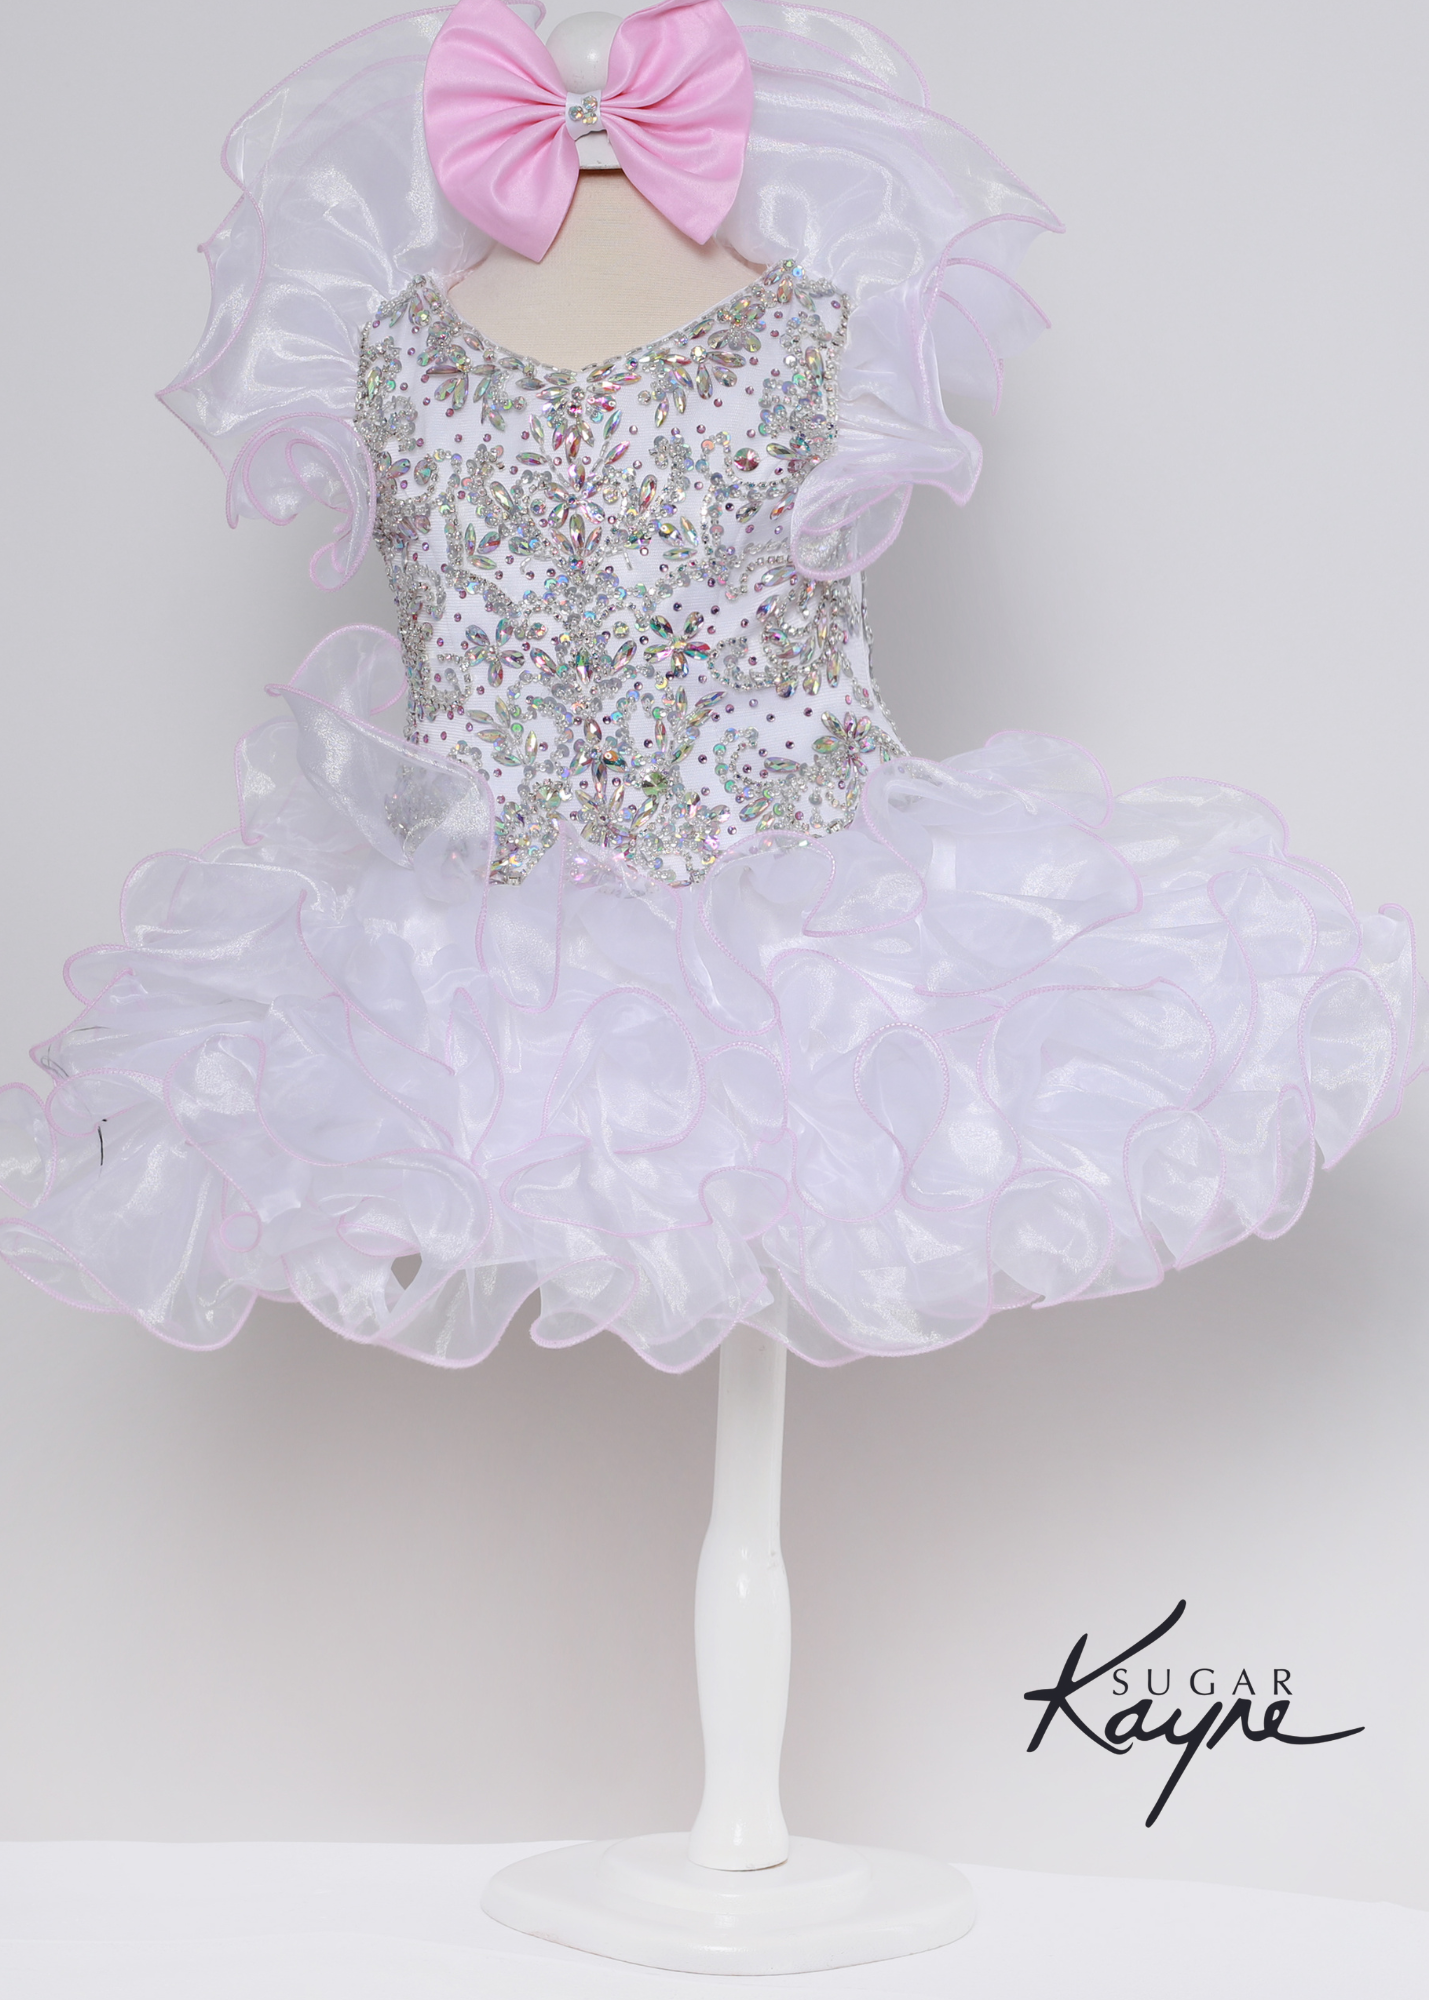 Sugar Kayne C227 Girls Baby Crystal Beaded Ruffle Sleeve Cupcake Pageant Dress Formal Have your little cupcake bring on all the charm in this stunning organza gown. The corset back is the perfect addition as the little one grows!  Colors: Baby Pink, White-Pink  Sizes: 0M, 12M, 18M, 24M, 2T, 3T, 4T, 5T, 6M, 6T  Fabric Organza, Satin Lining